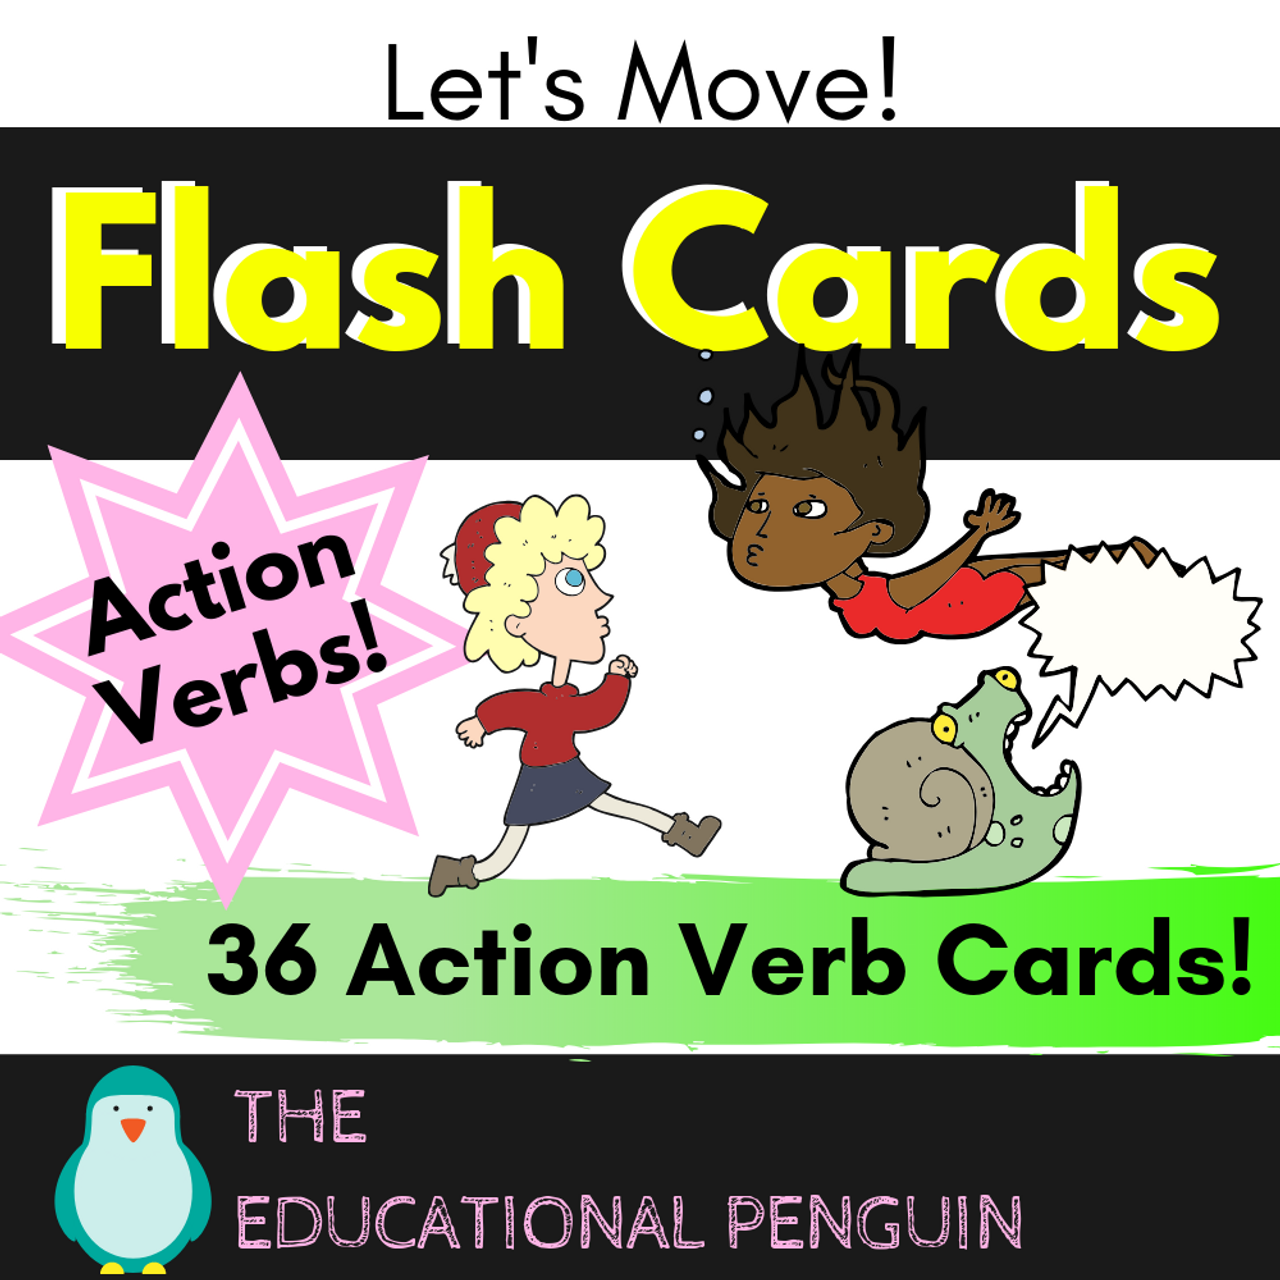 Flash Cards: Action Verbs - Amped Up Learning